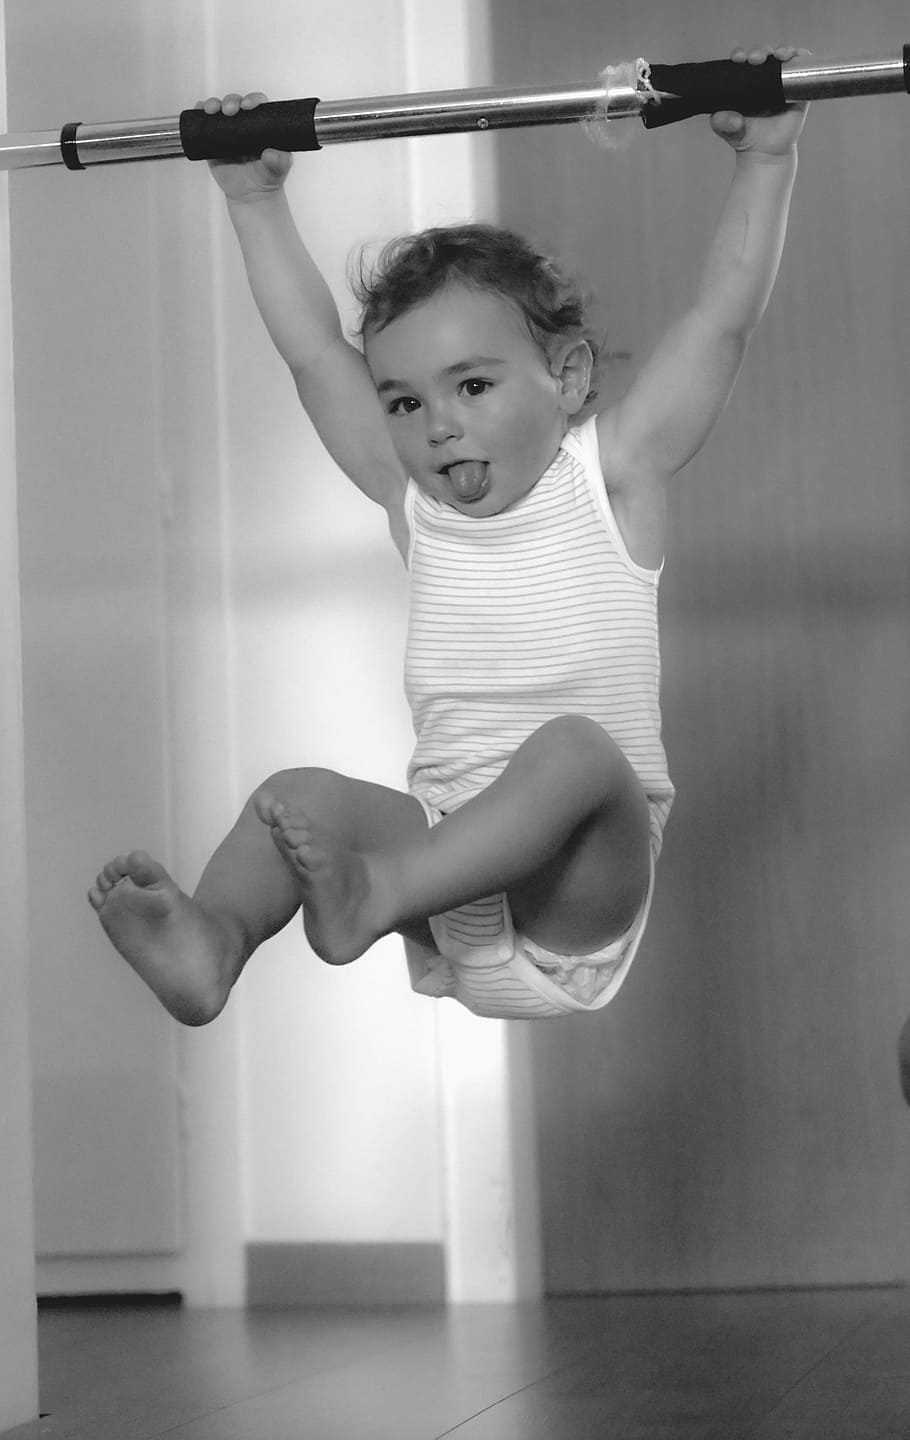 toddler, hanging, rod, tongue, grayscale photo, sport, fitness, training, sporty, abdominal trainer